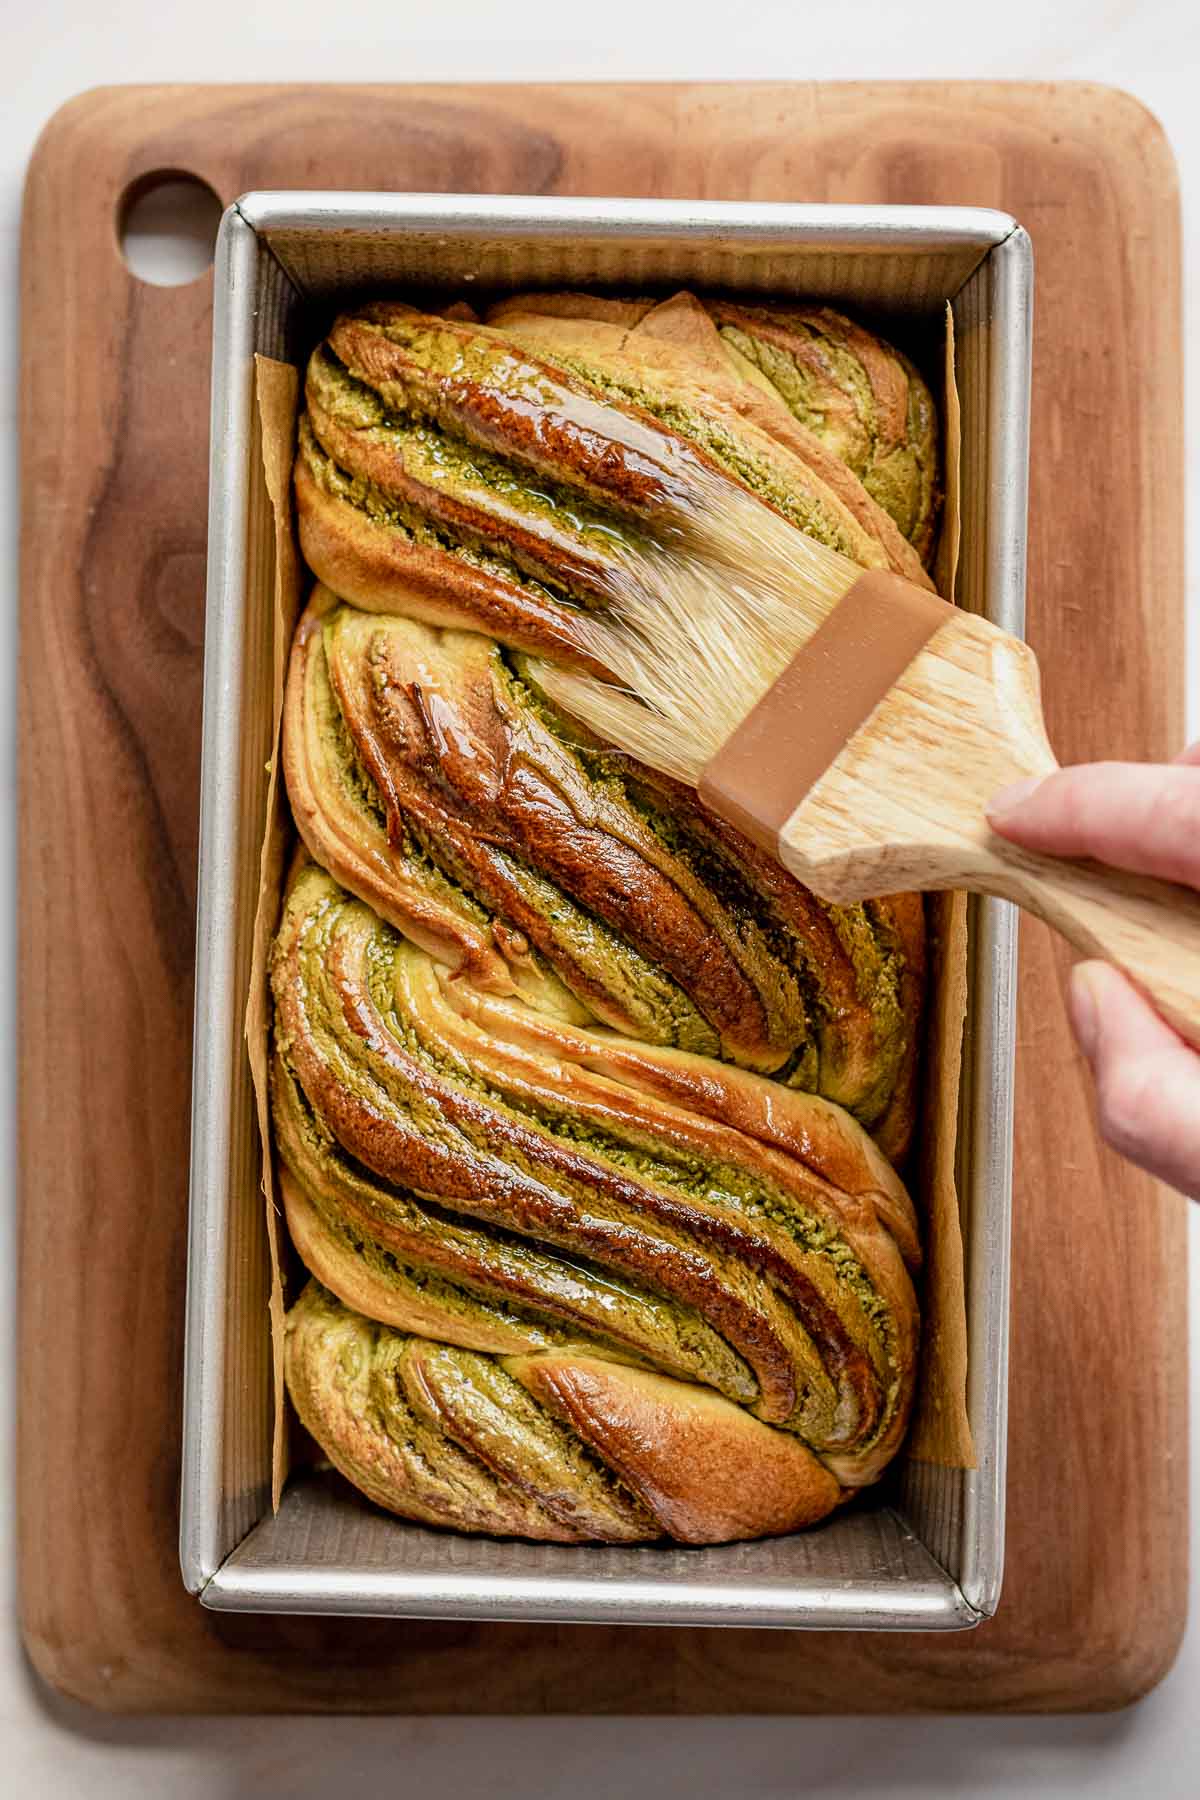 A hand brushes on simple syrup on the baked babka.